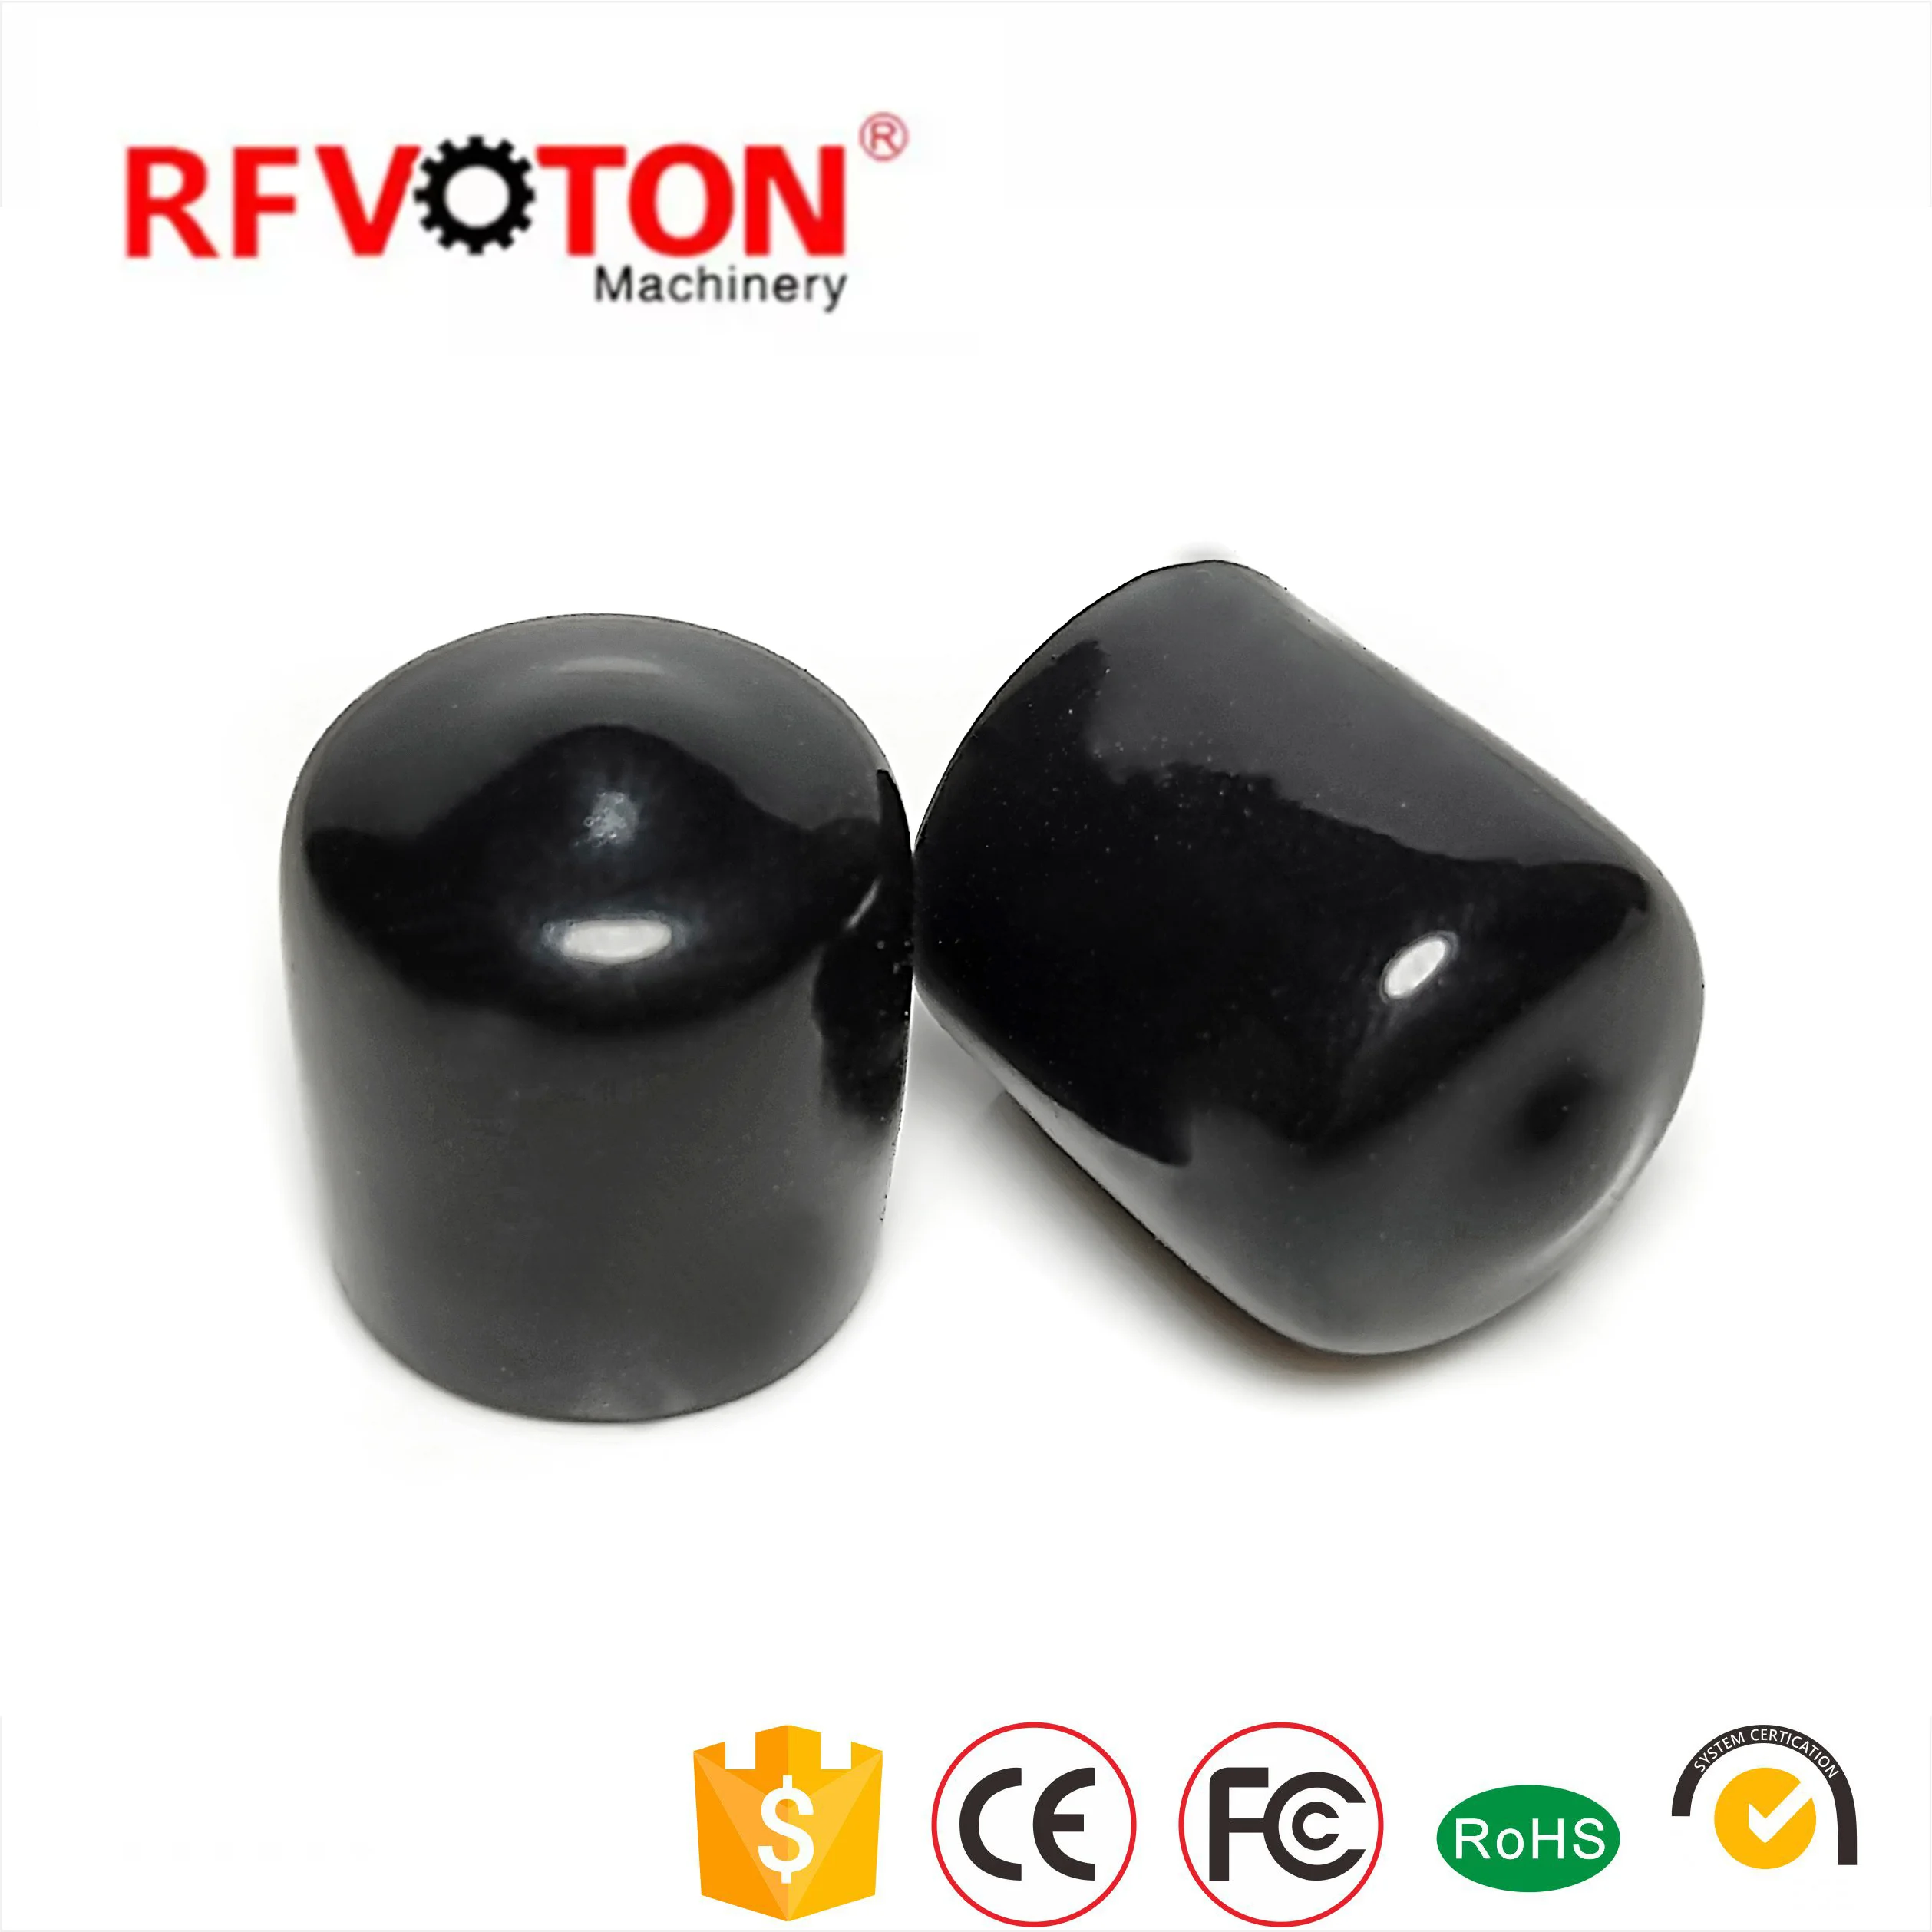 Factory supply Waterproof black connector plastic end rubber sma dust protection cap caps manufacture